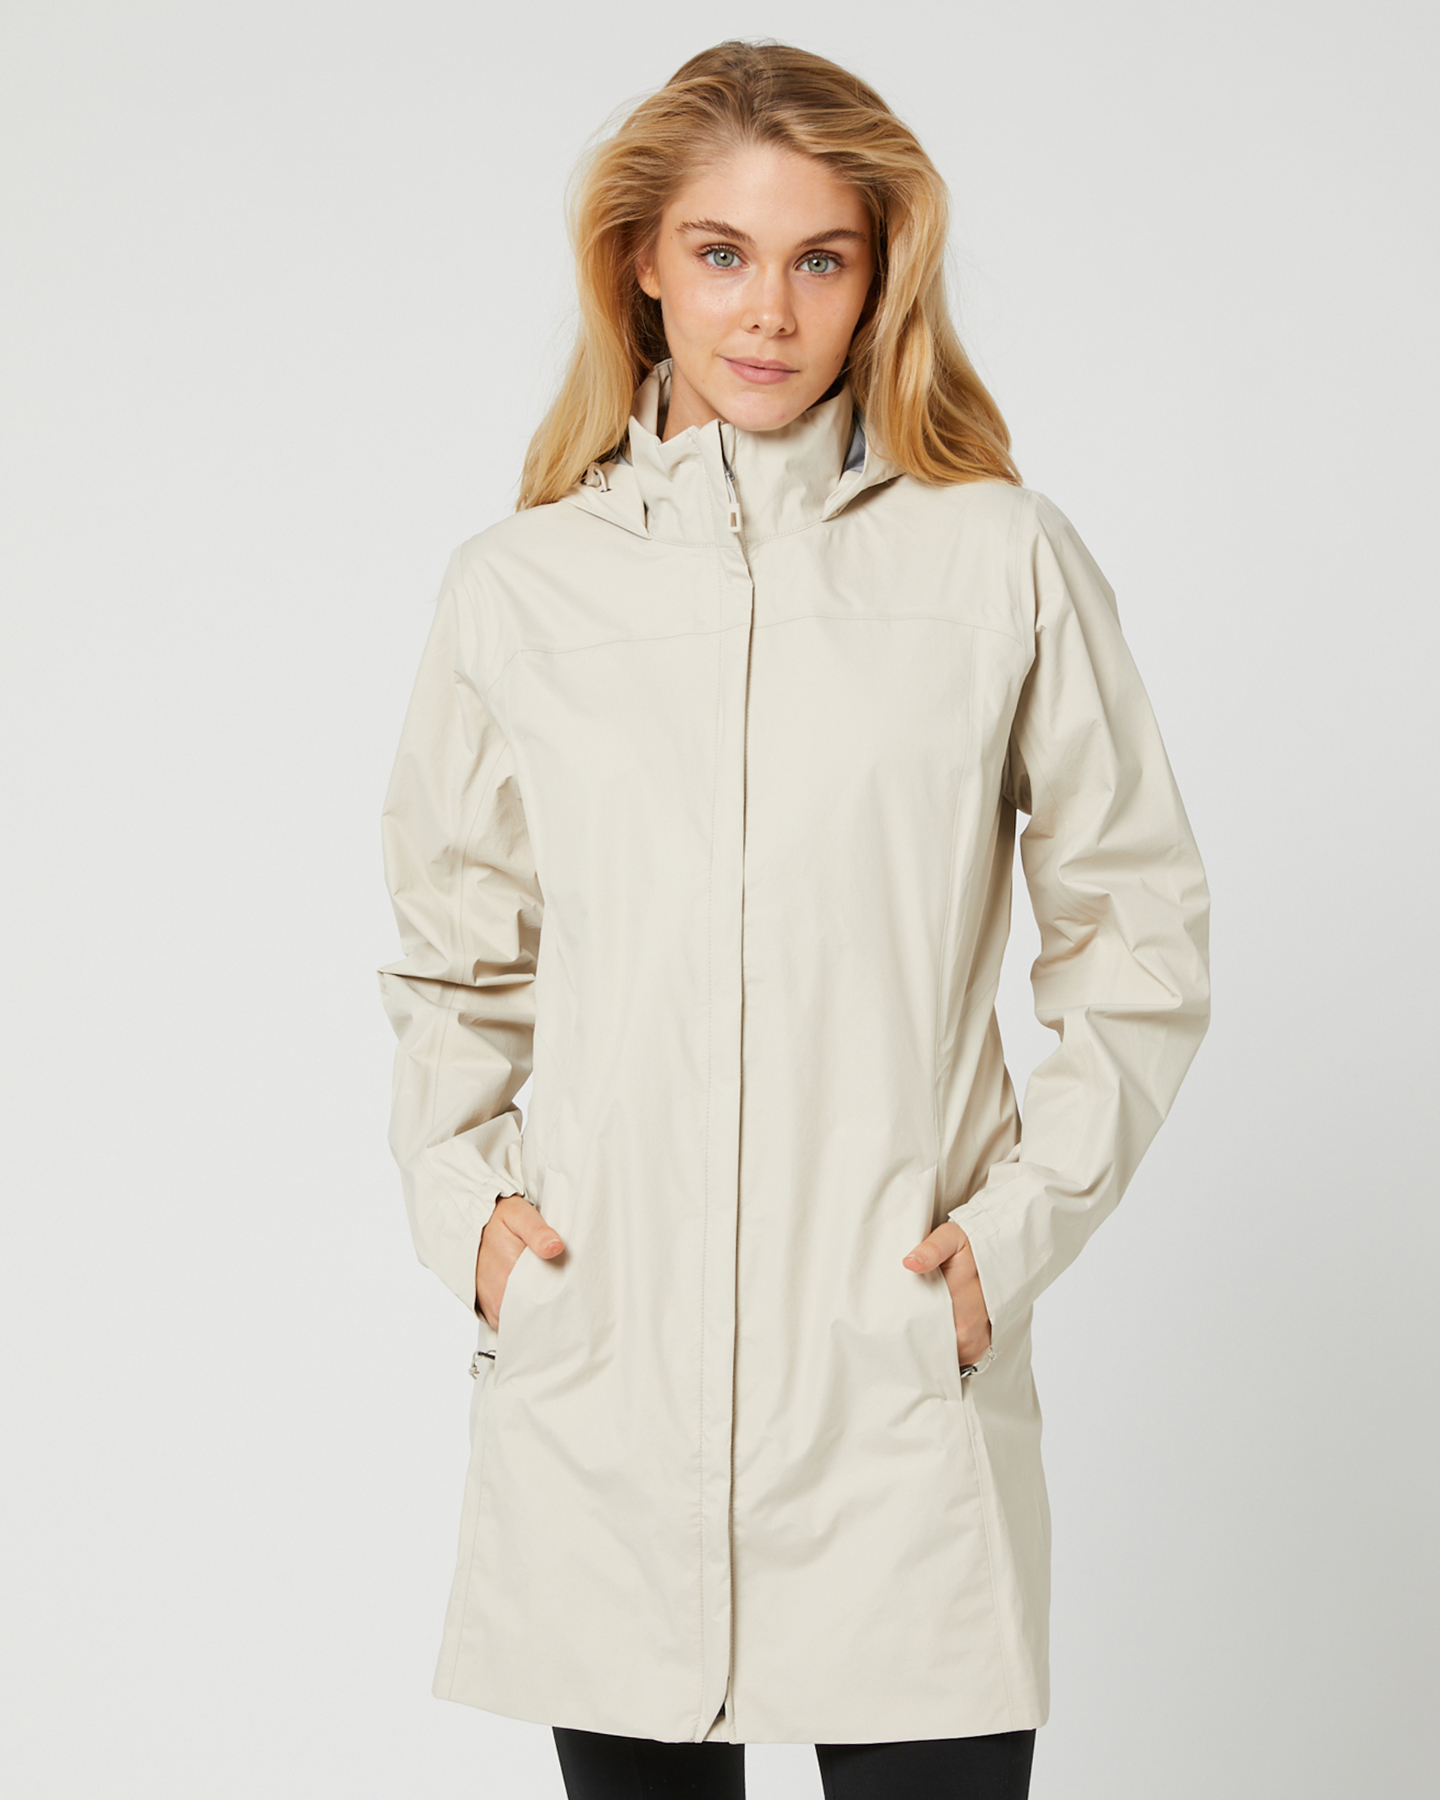 Patagonia Women's Torrentshell 3 Layer City Coat - Natural | SurfStitch